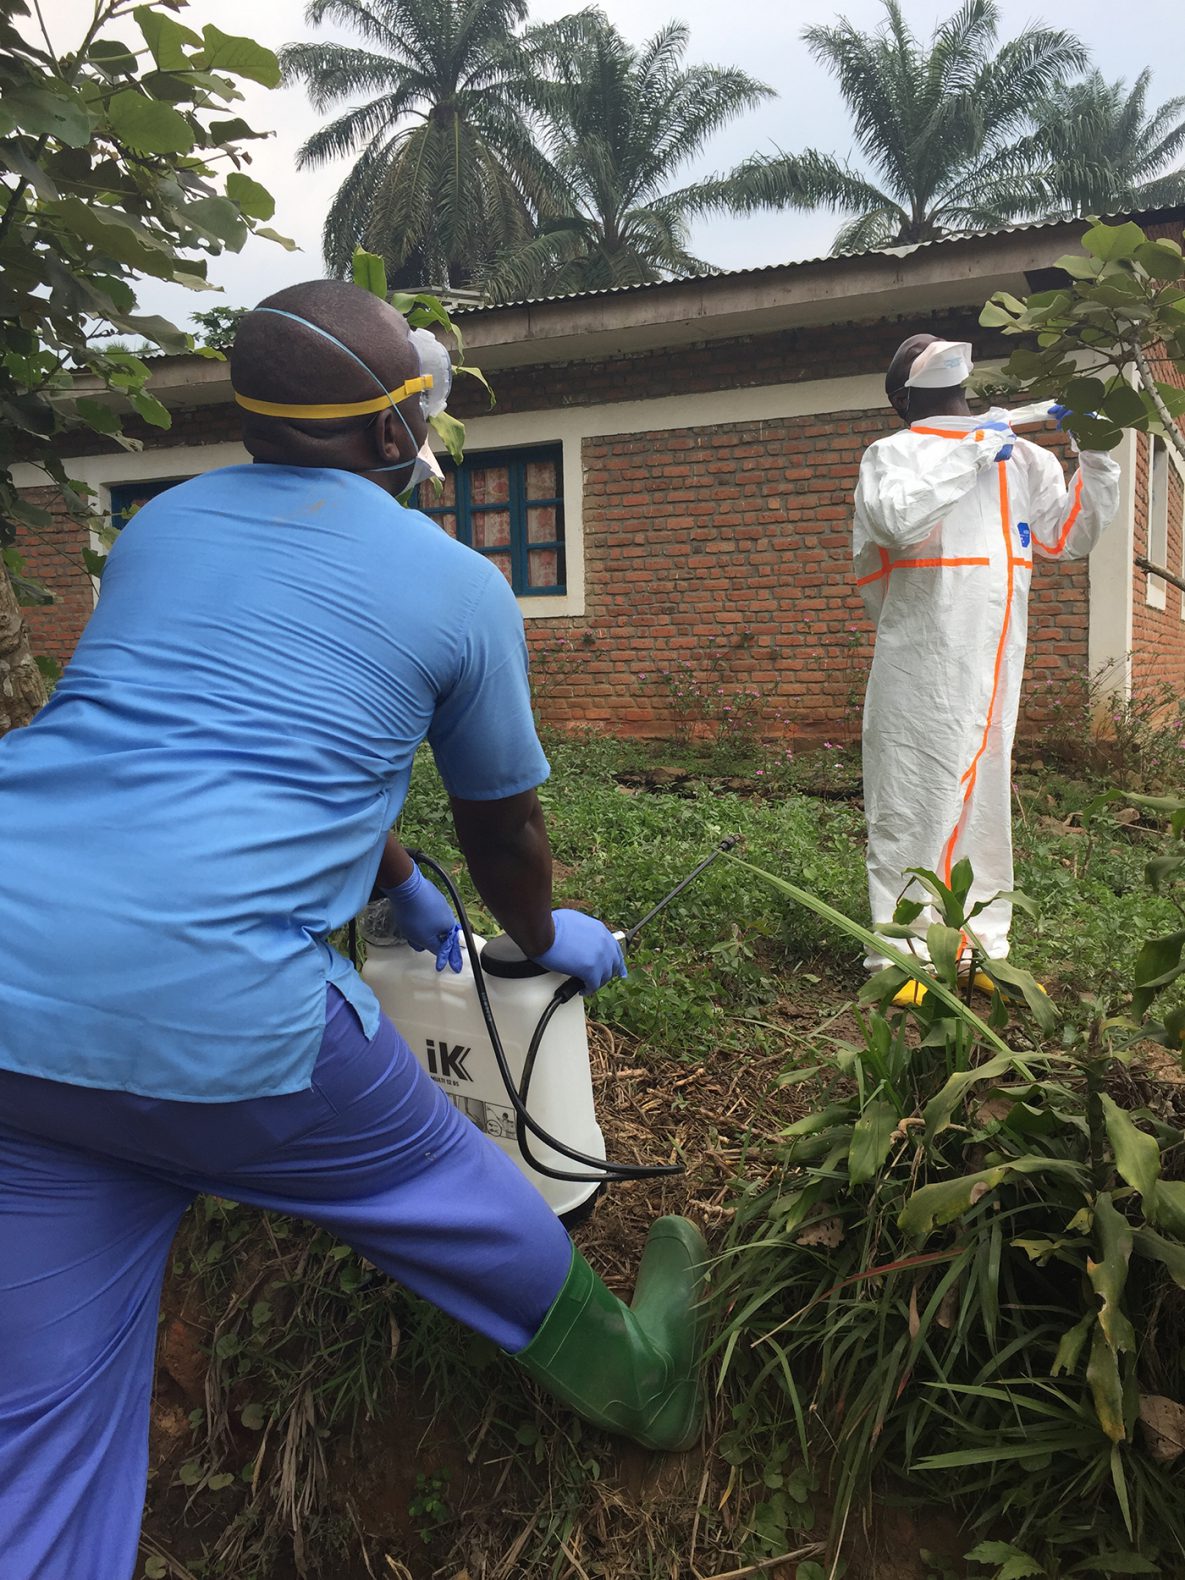 A new set of Ebola cases in South Kivu posed additional challenges for responders due to the distance to an Ebola Treatment Center. The Local Health Center (Centre de santé de Chowe) was turned into a makeshift transit center until an Ebola Treatment Center could be built down the road. Pictured is a healthcare worker removing personal protective equipment (PPE) with supervision from a colleague using a hedge to mark the edge of the contaminated area—the hot zone.